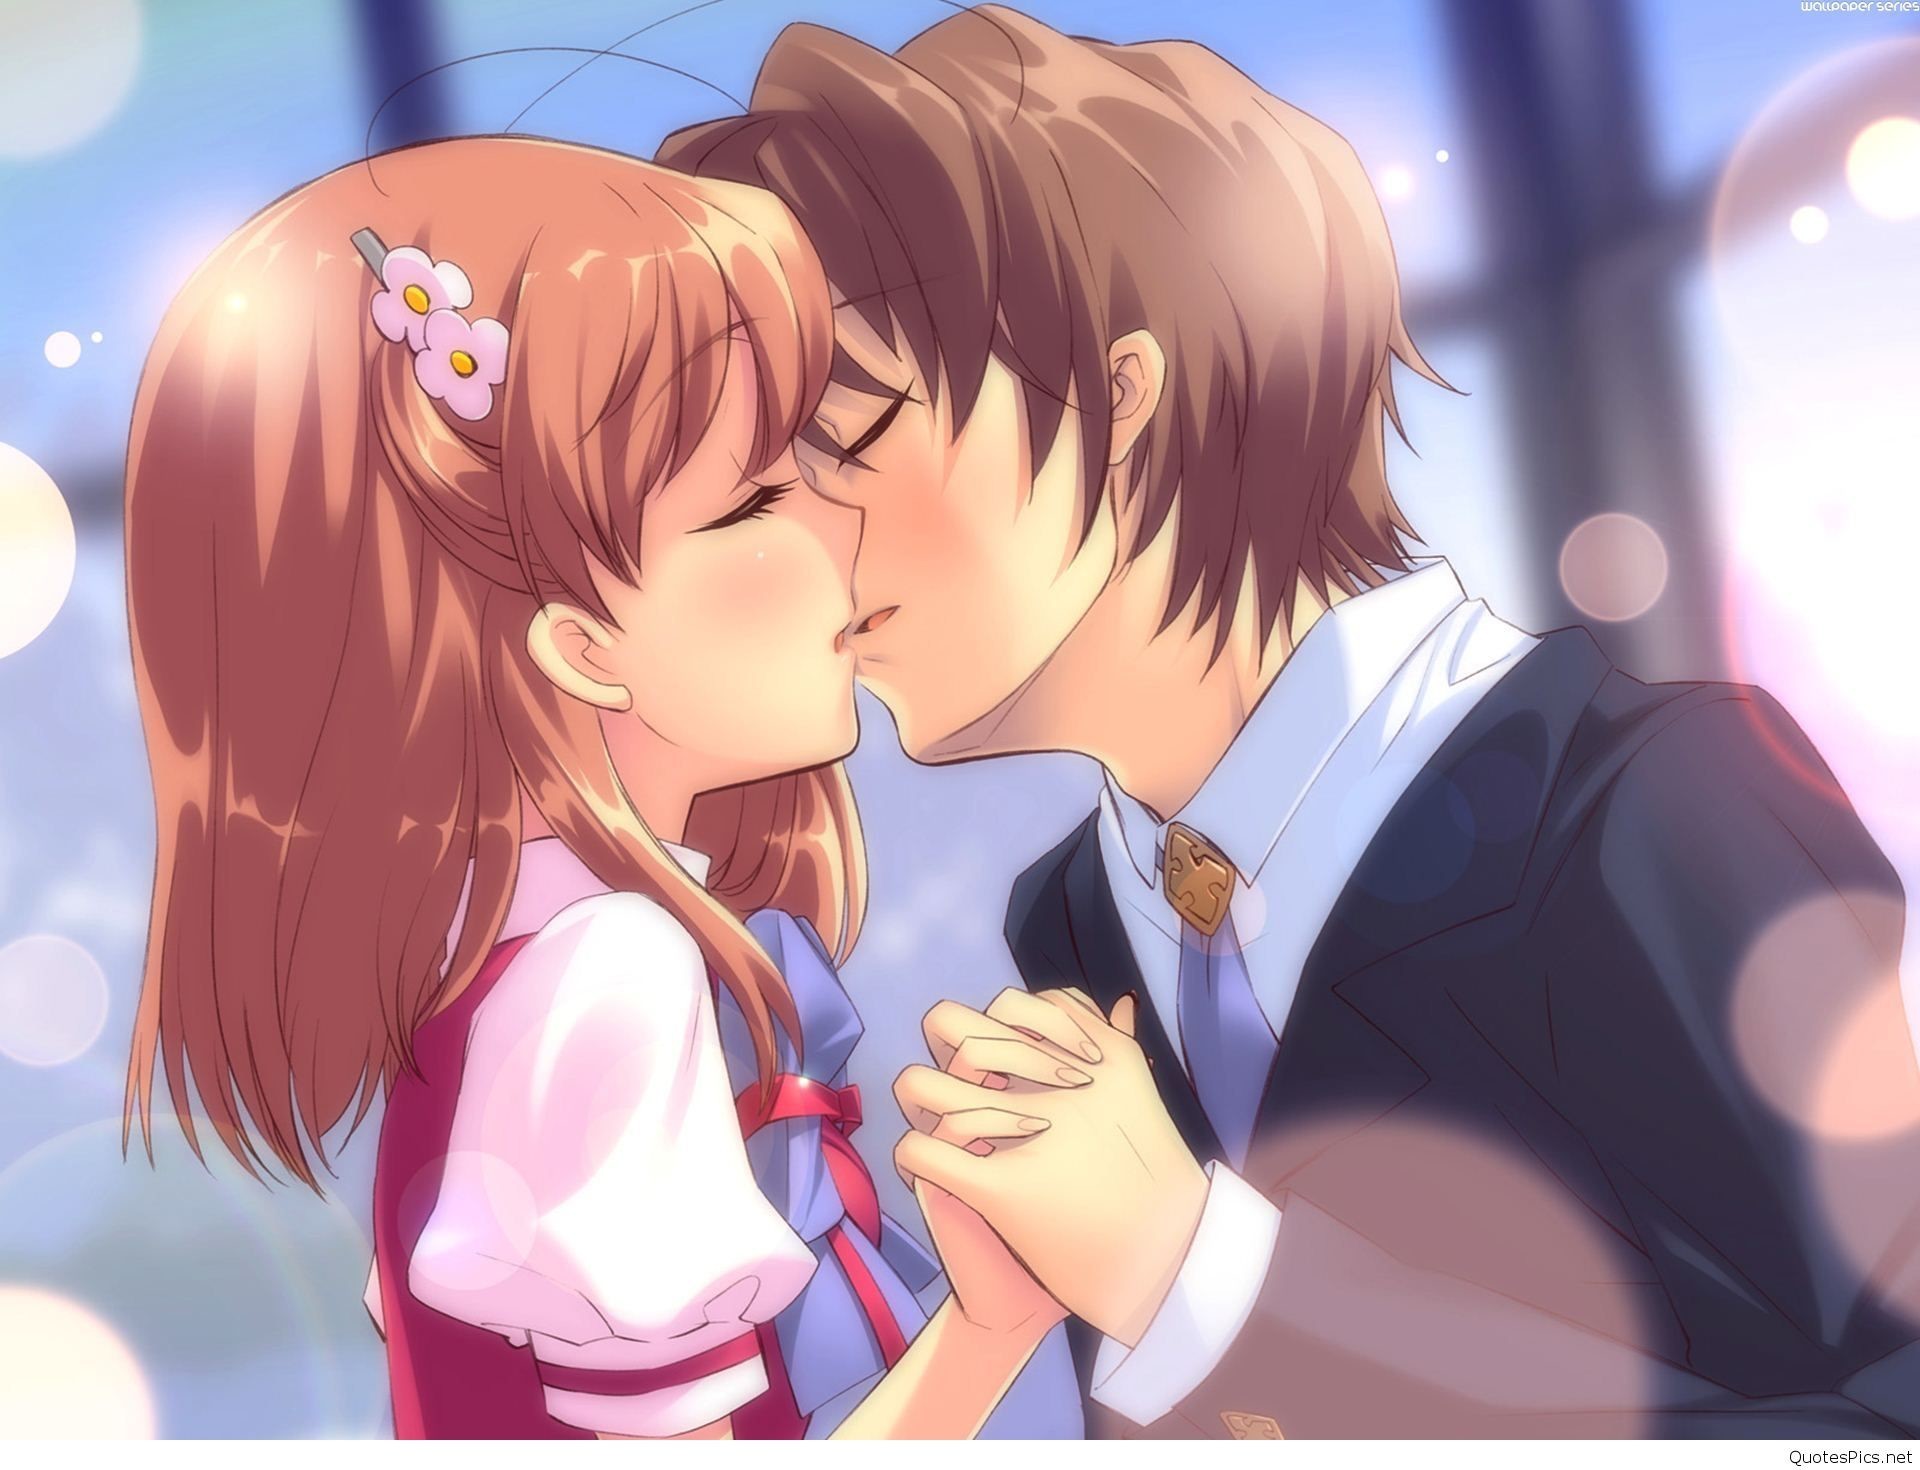 Sweet Couple Anime Wallpaper 77 Images